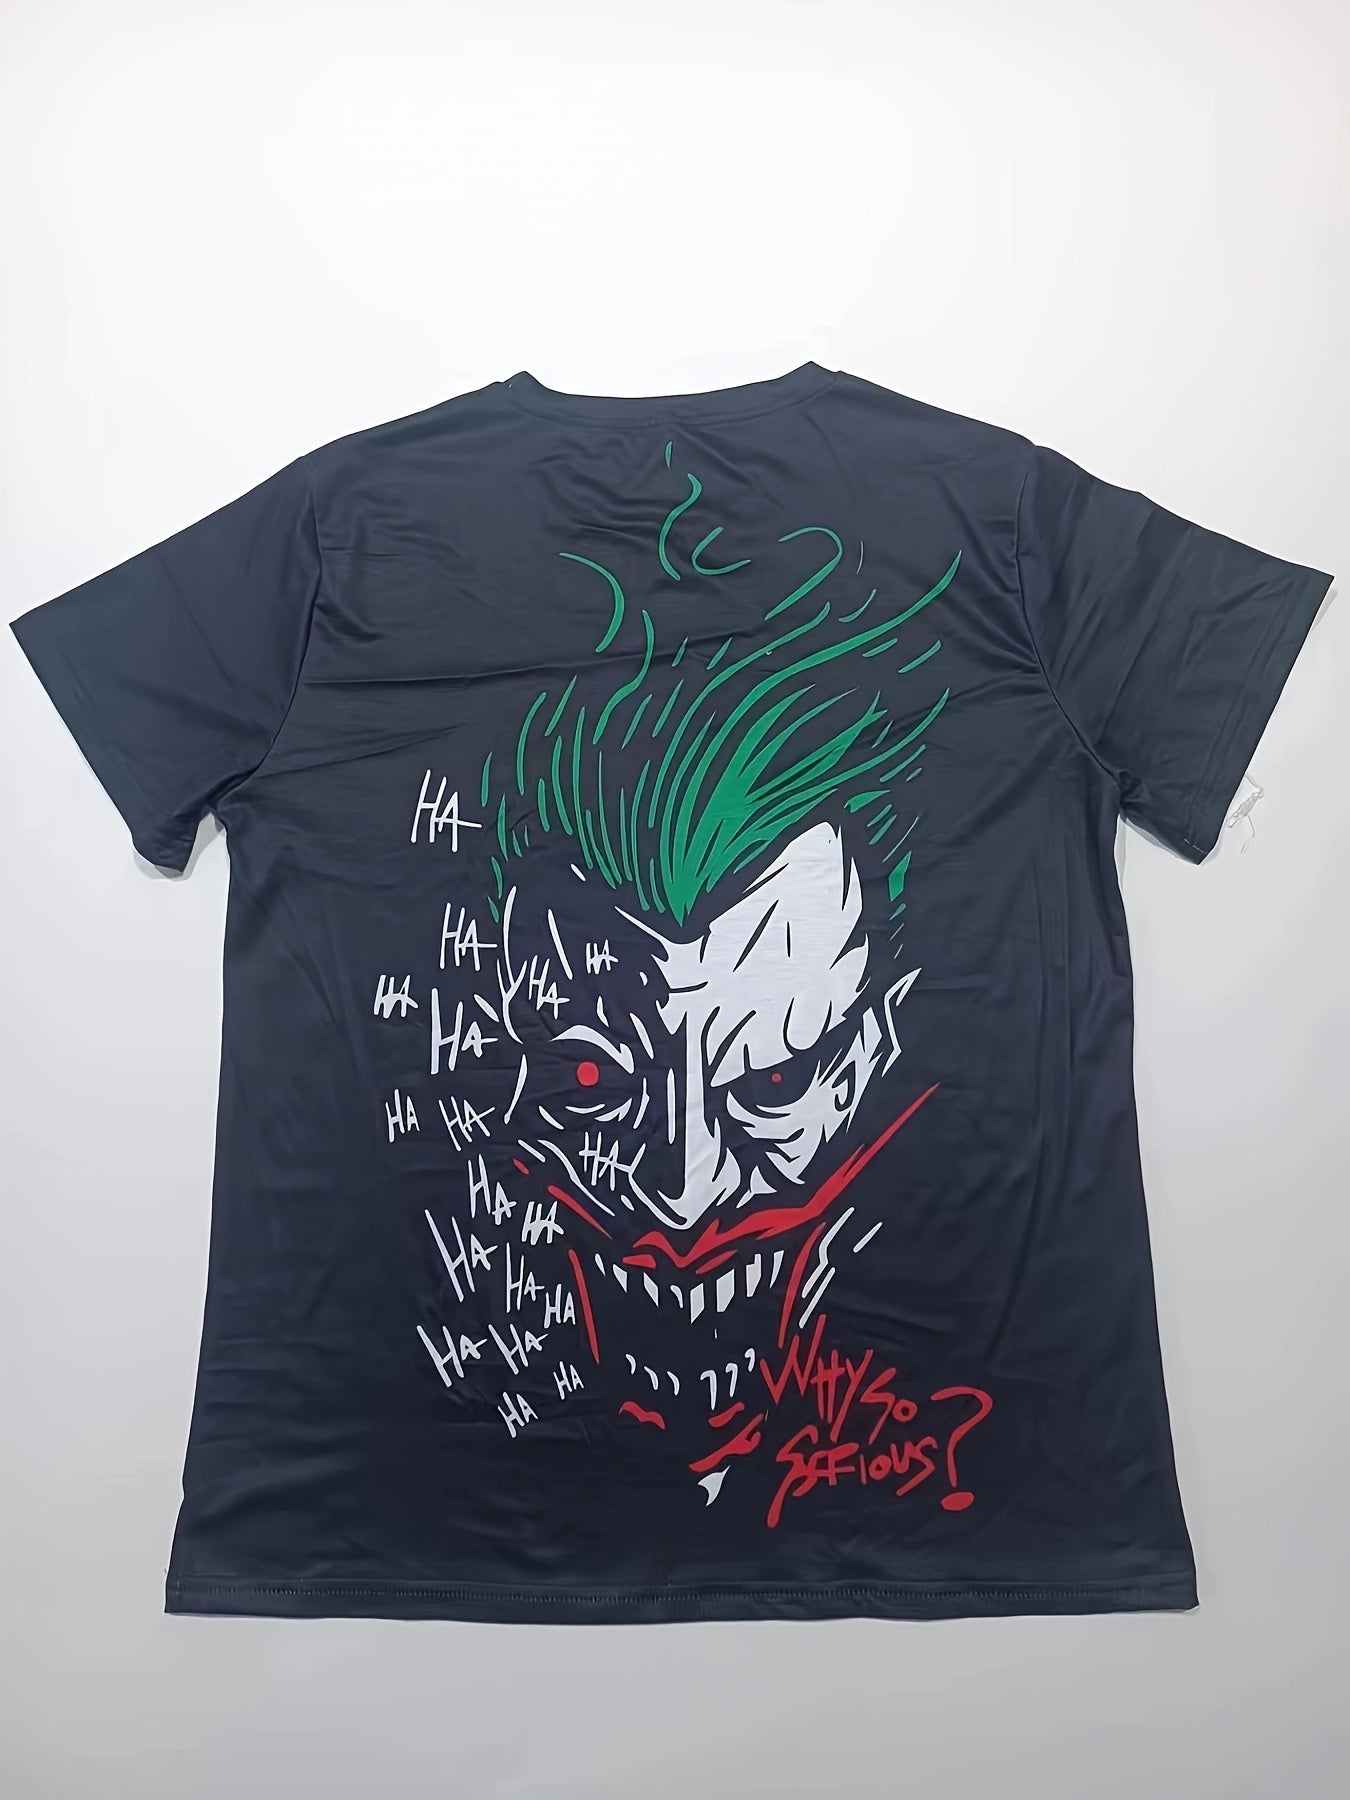 Why So Serious? Embrace Your Inner Joker with This Graphic Tee! 🃏 - Rexpect Nerd